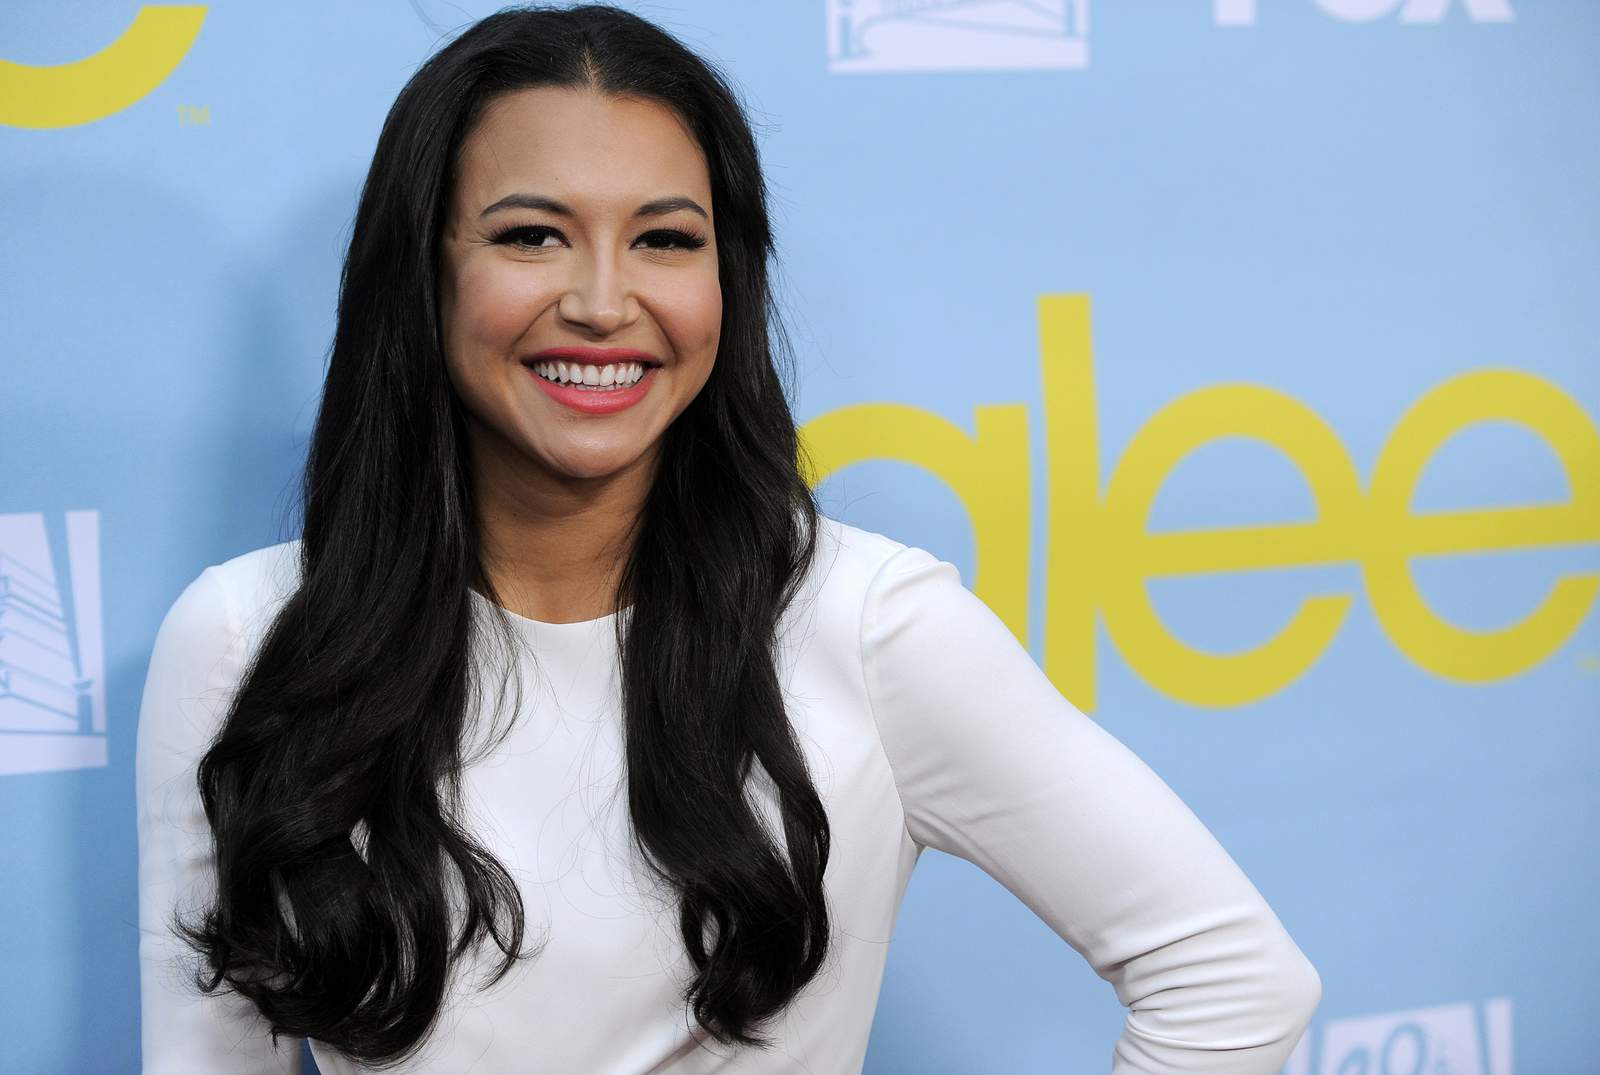 Wrongful death lawsuit filed over Naya Rivera’s drowning